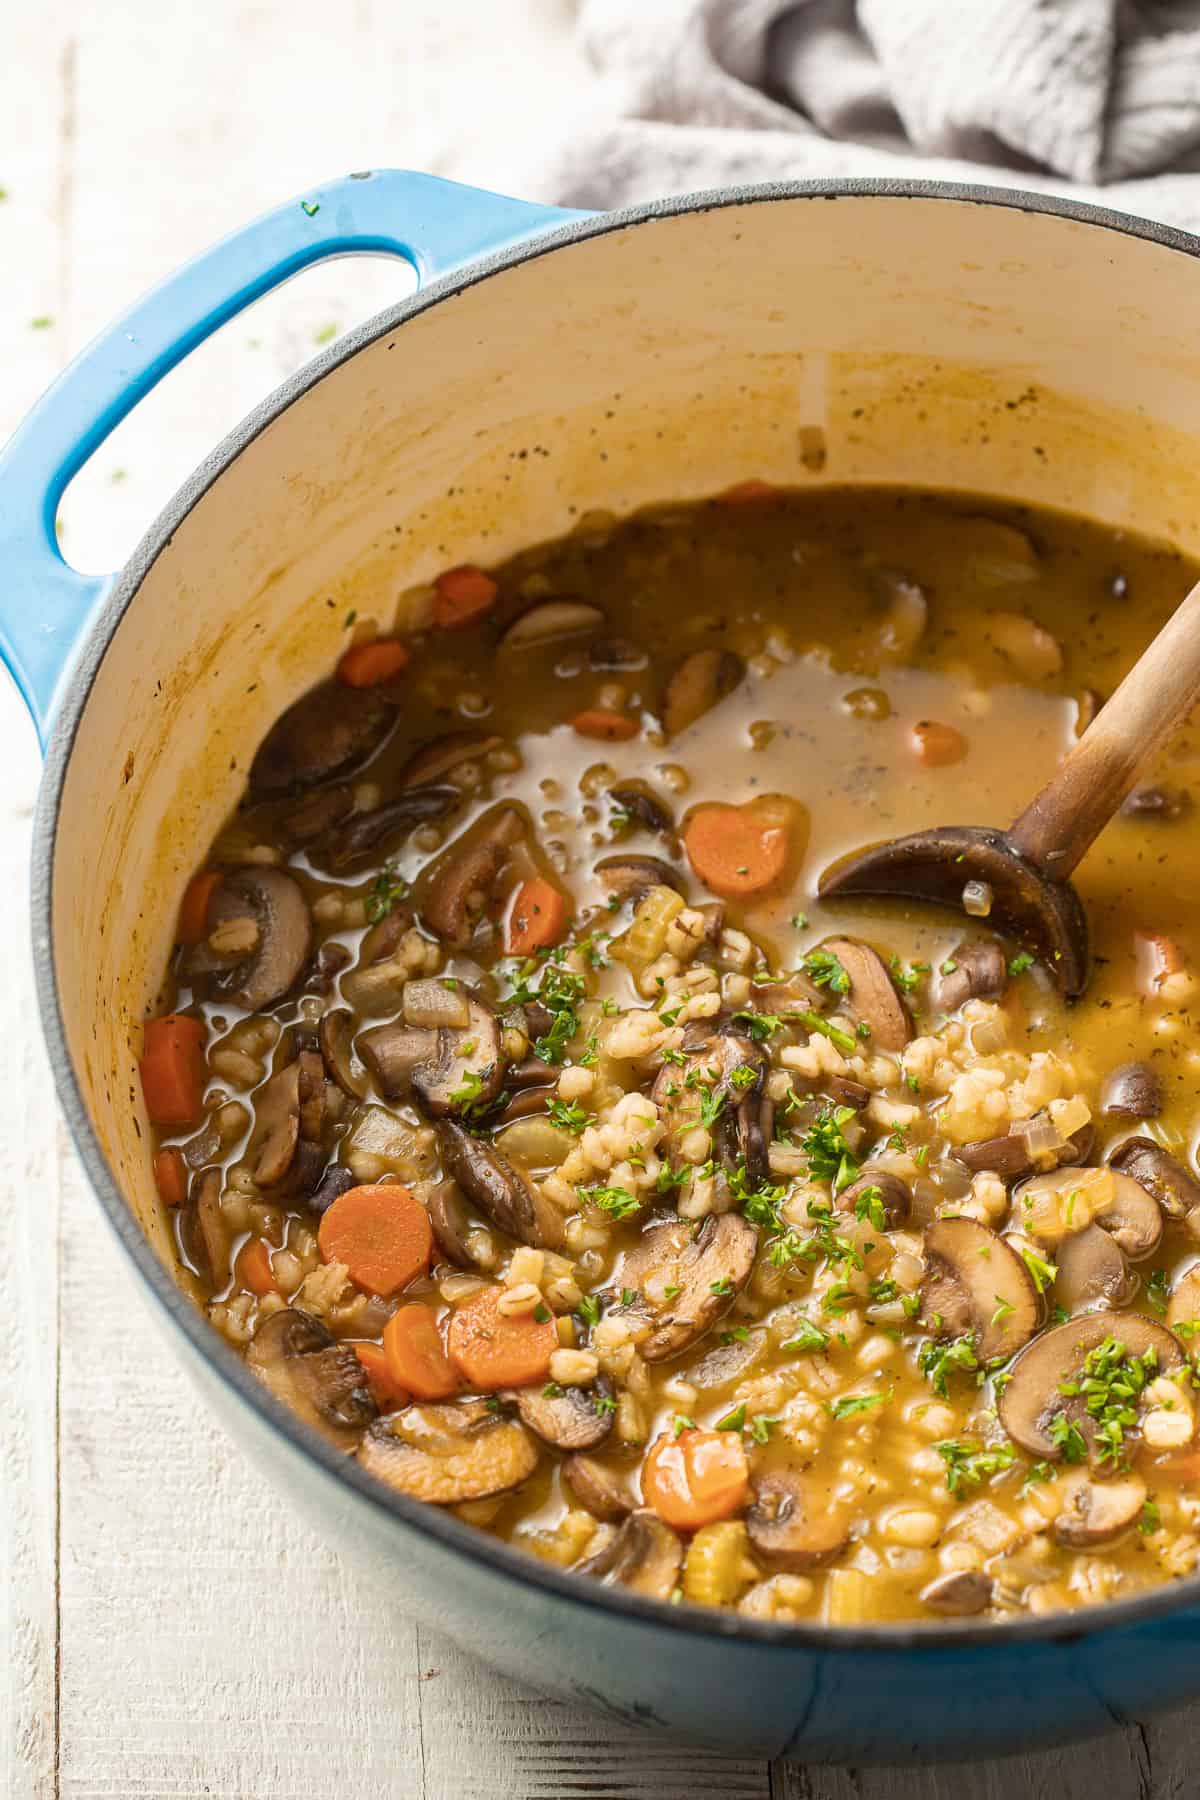 Bowl of mushroom barley soup with wooden spoon.